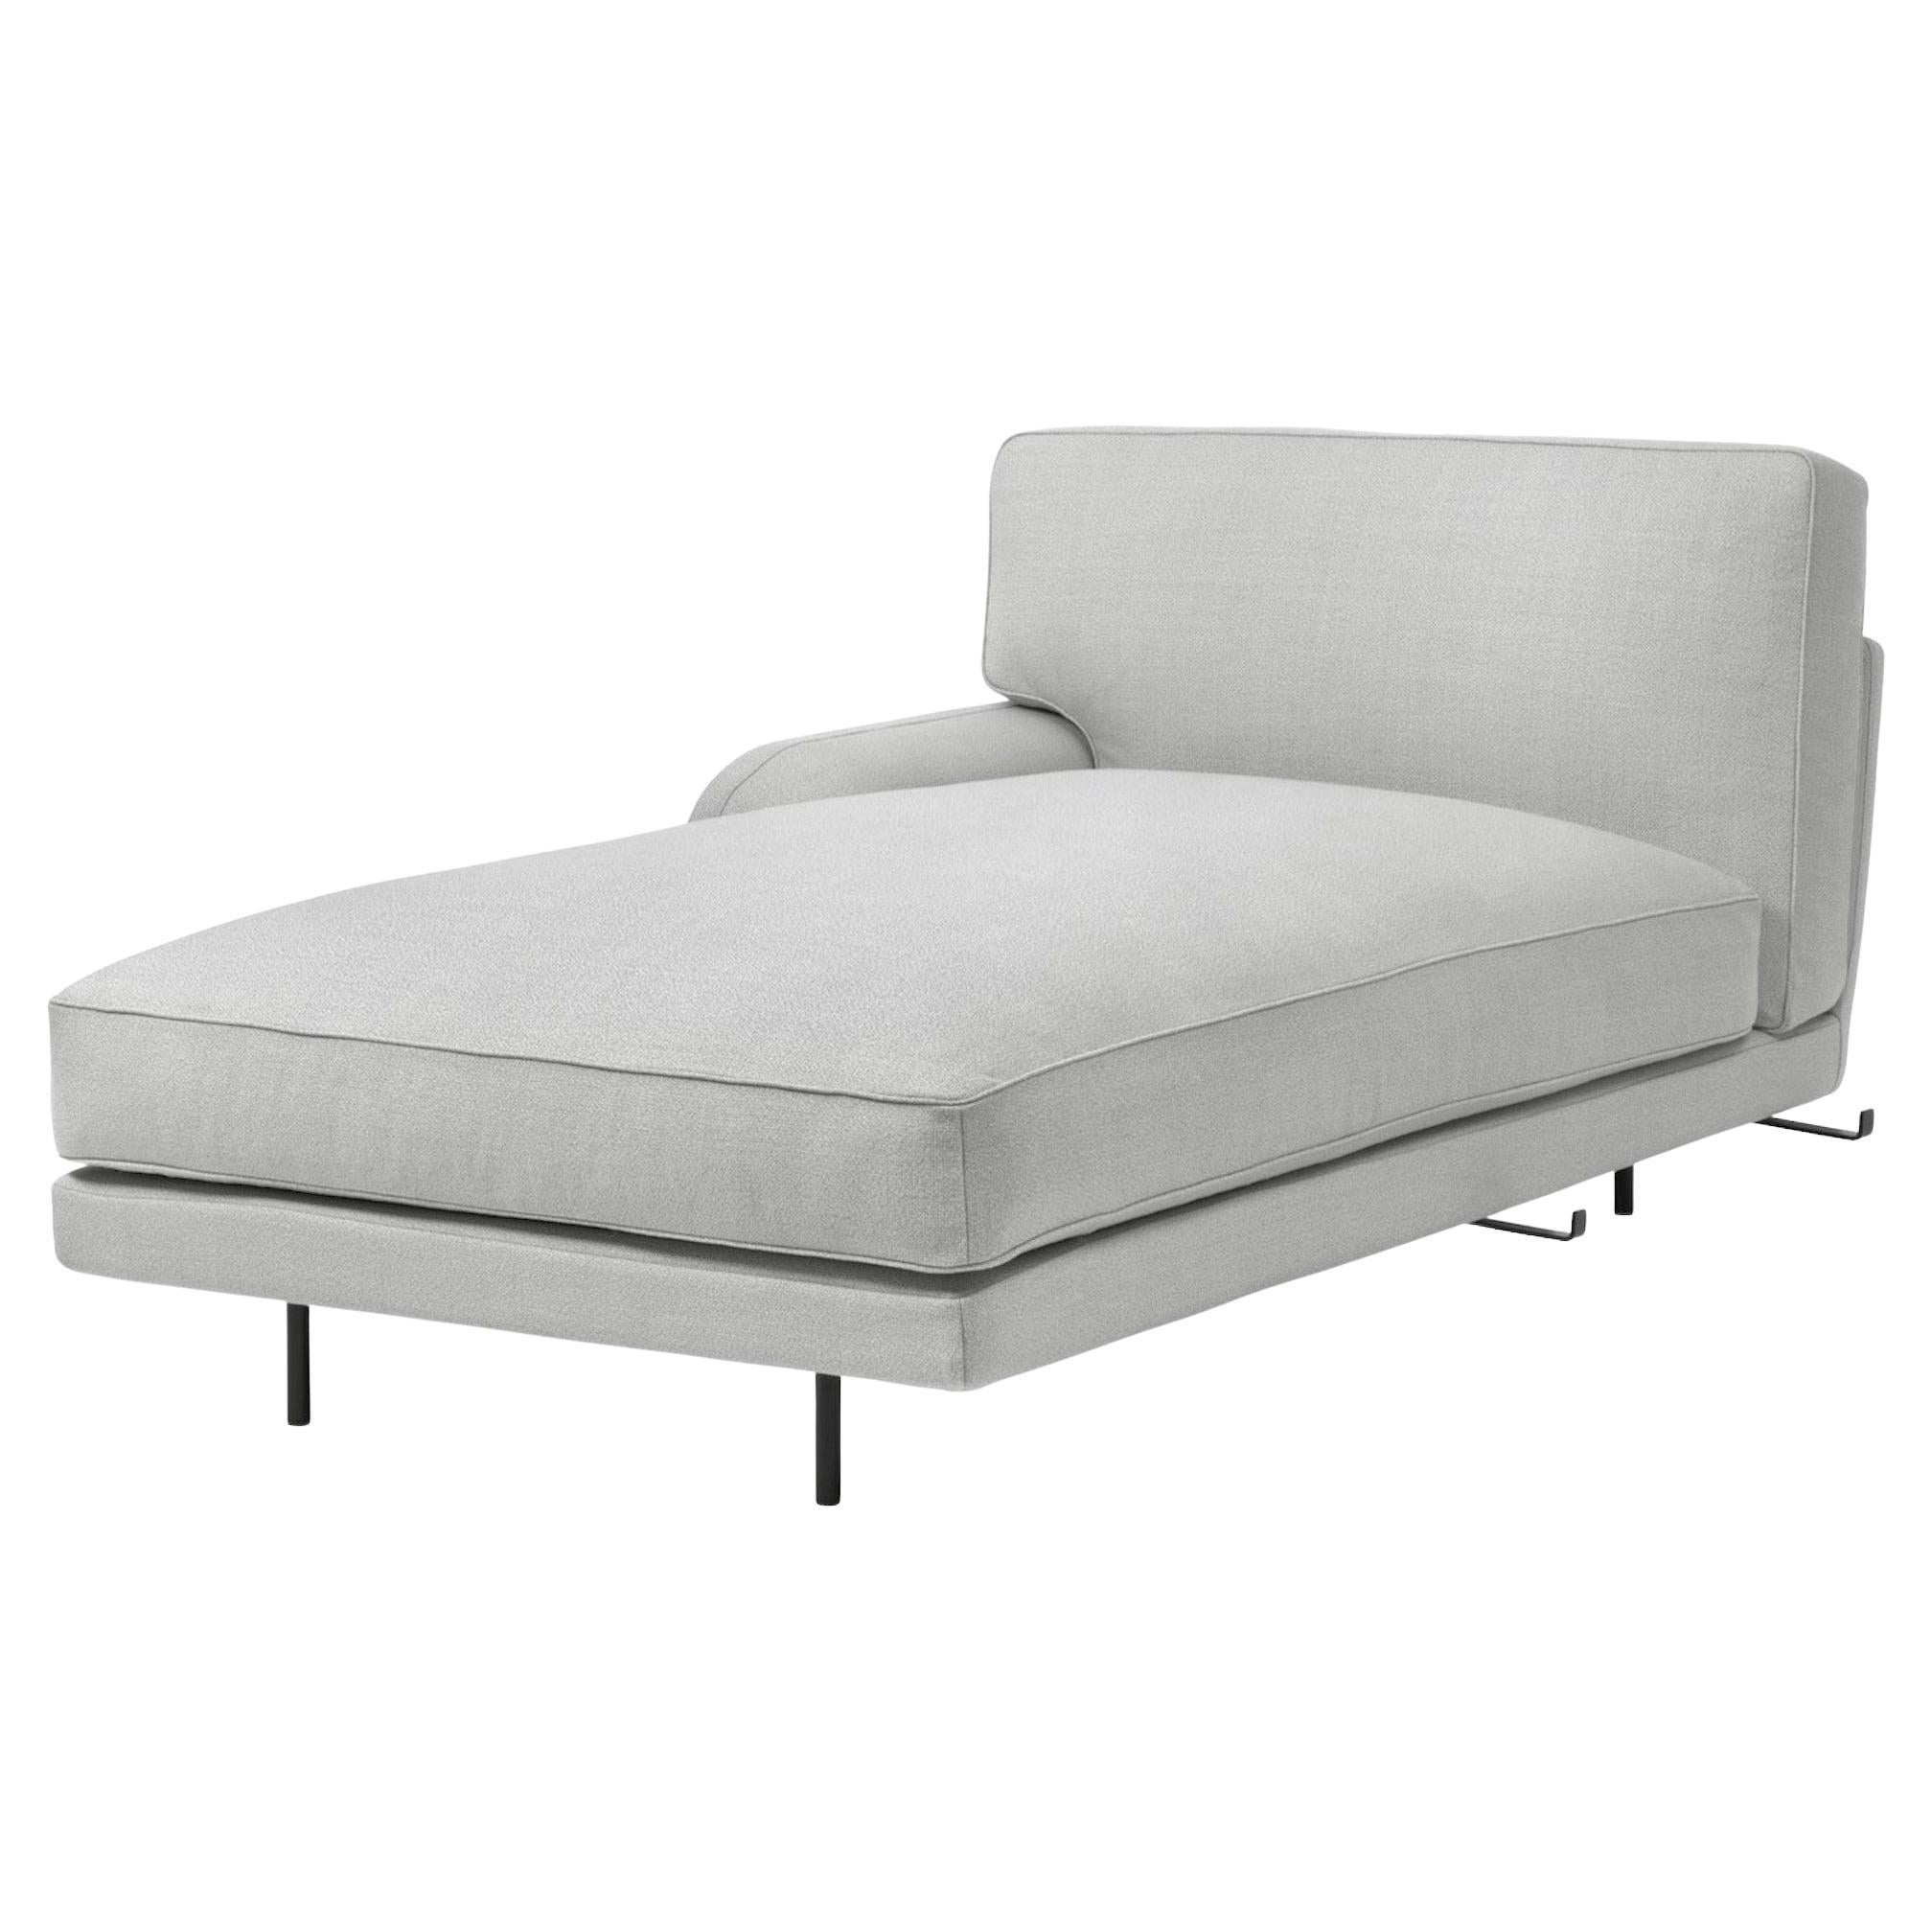 Customizable Gubi Flaneur Module, Chaise Longue with Righ Designed by Gamfratesi For Sale